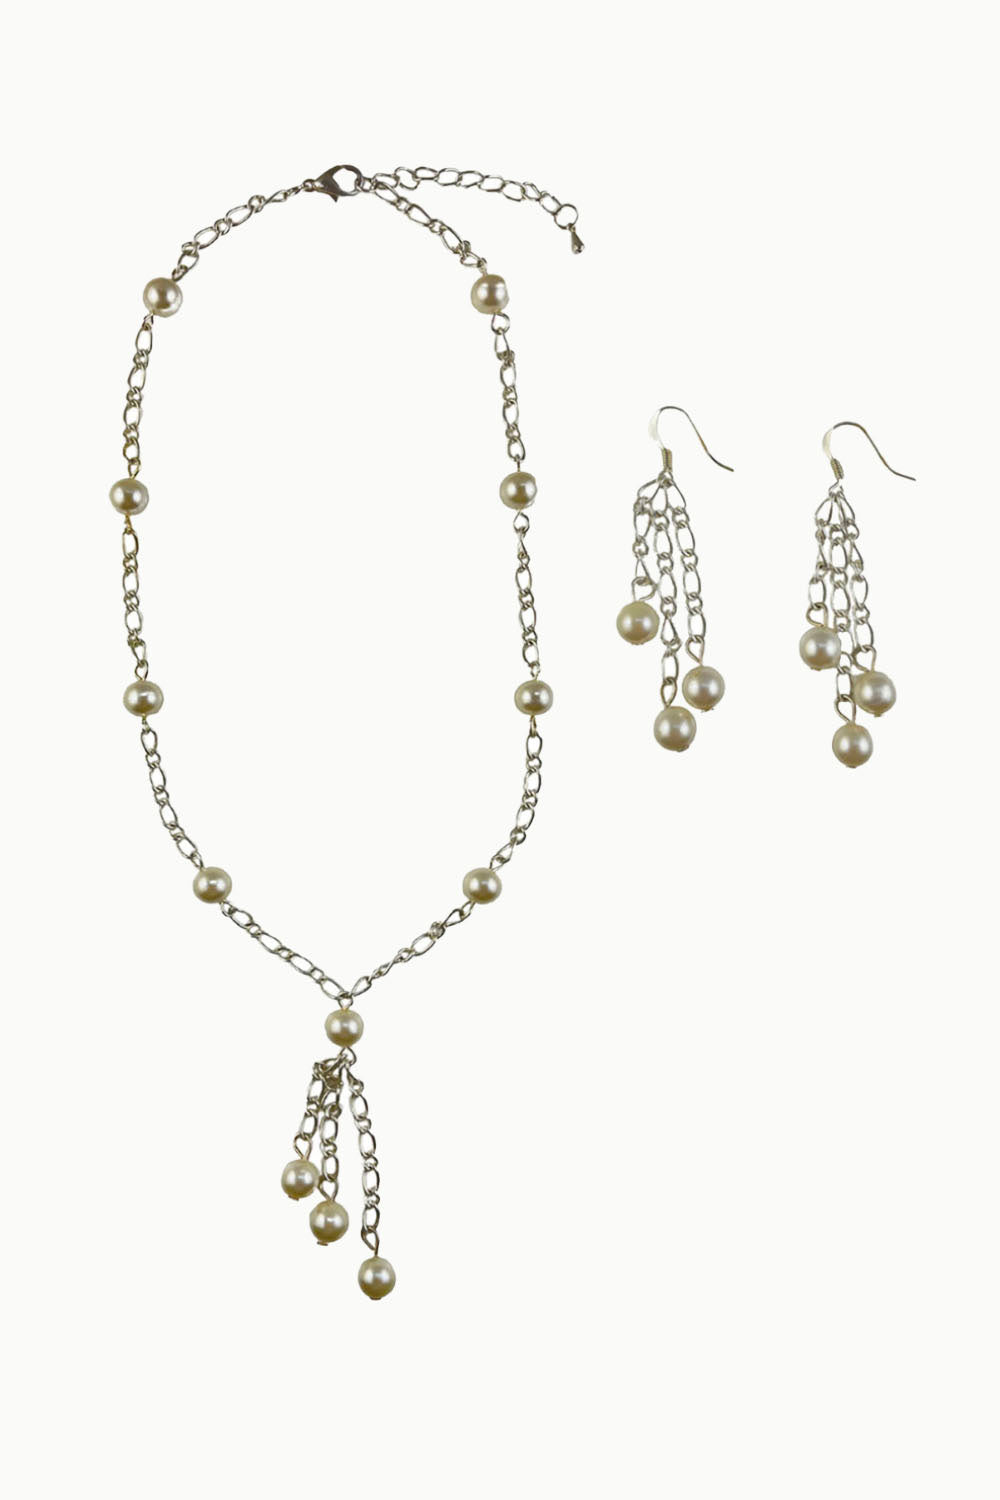 Ellis Pearl Necklace and Earrings Set